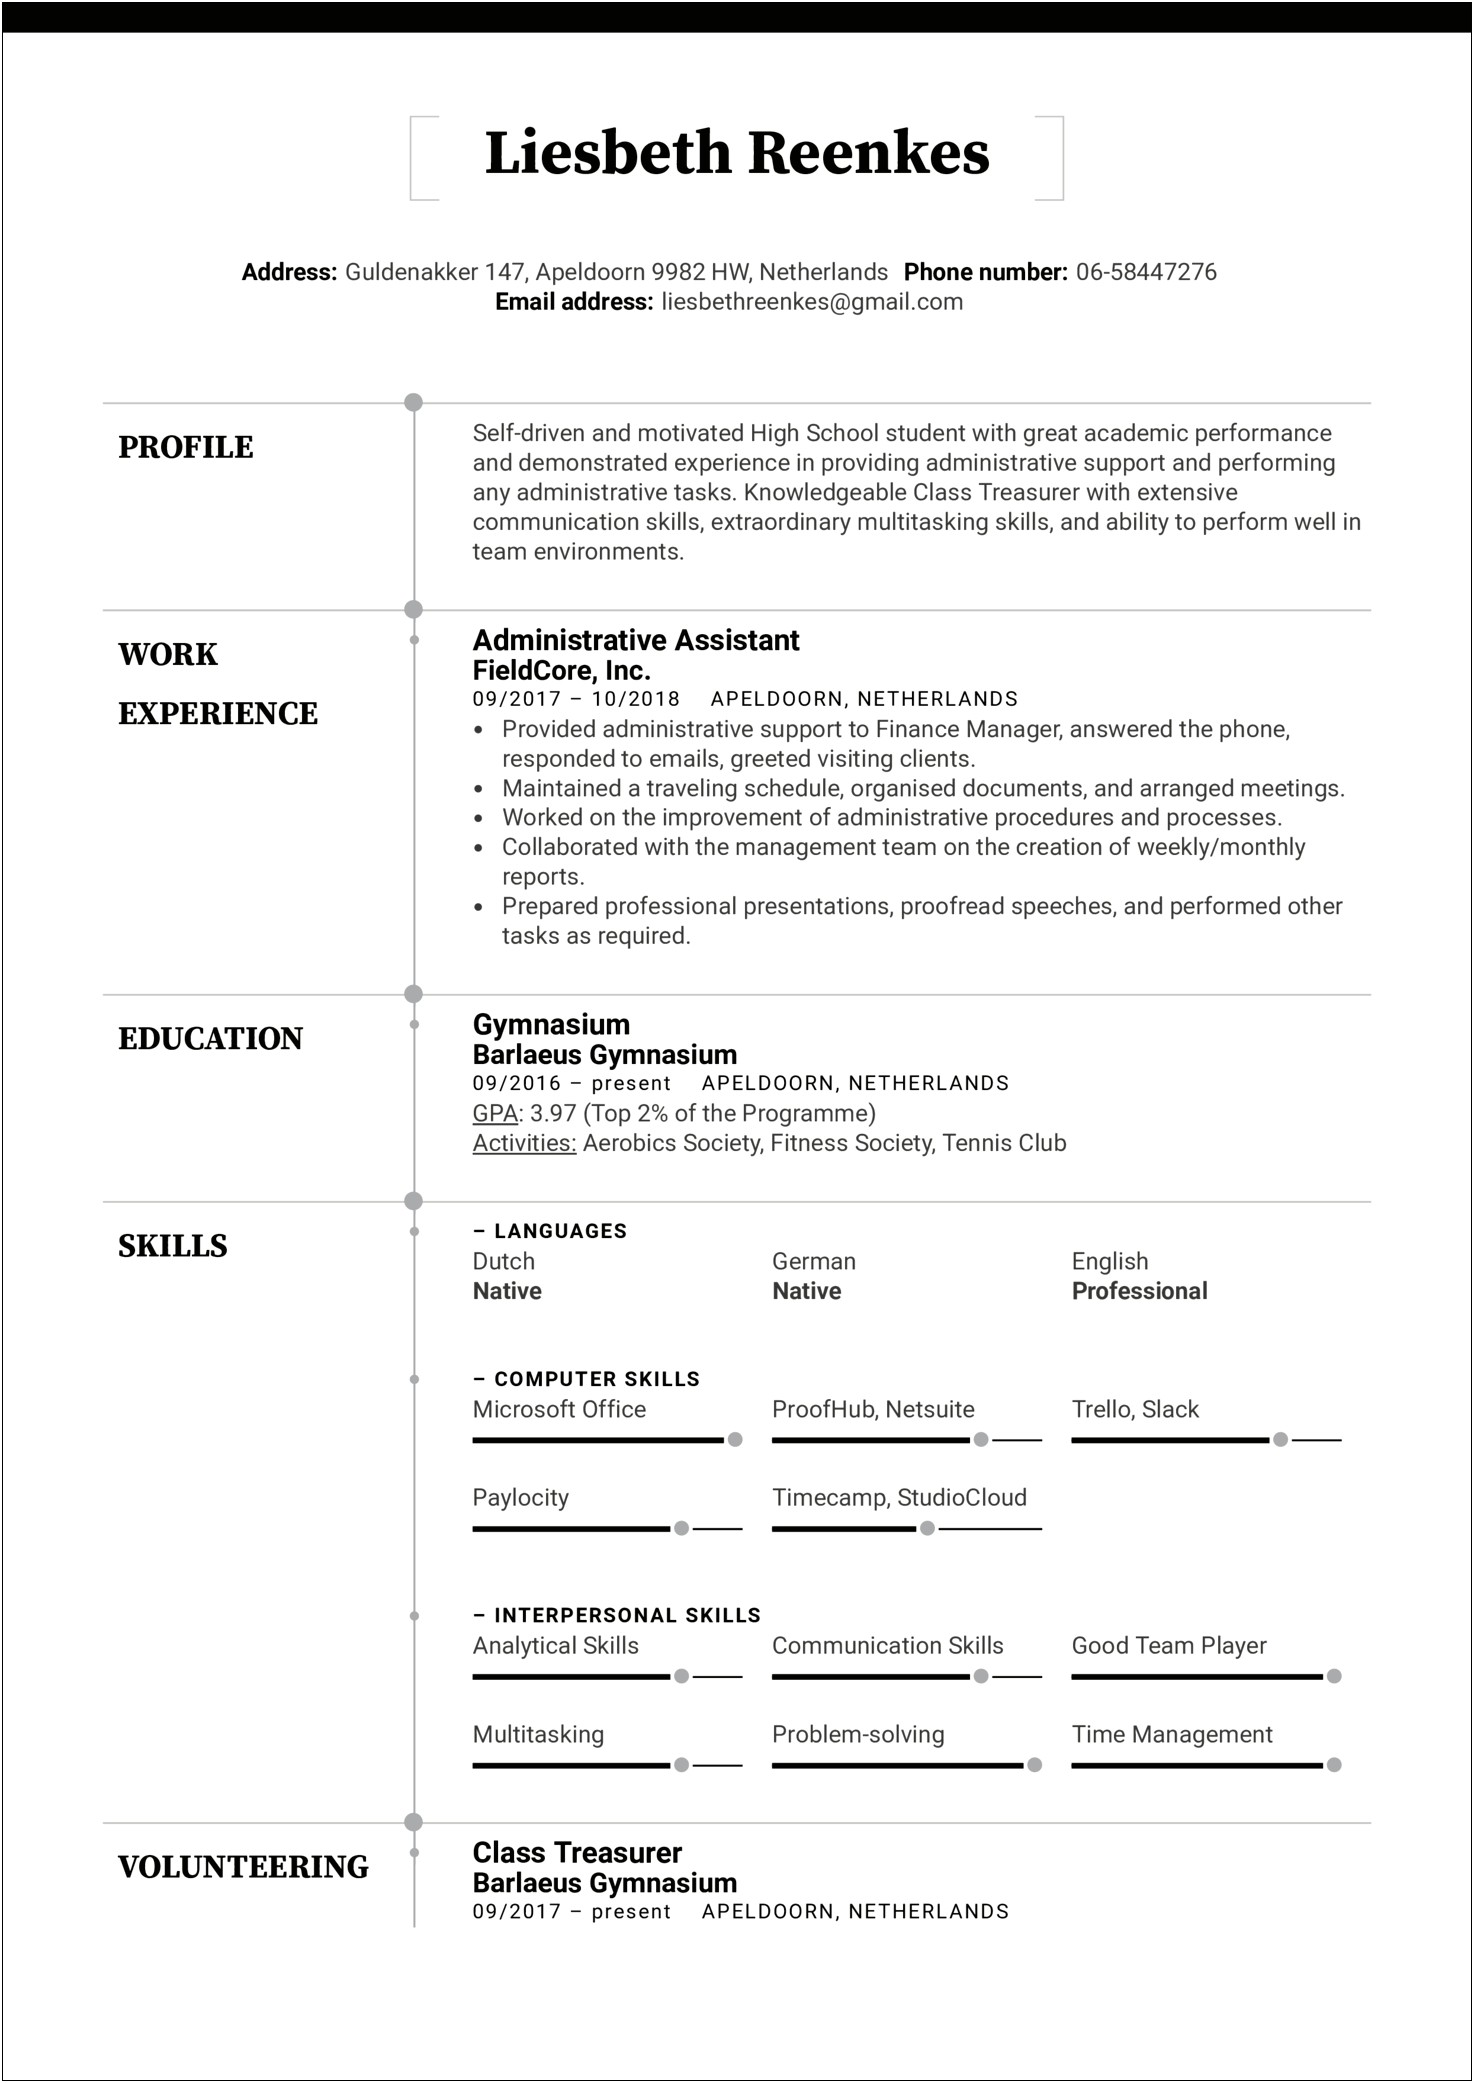 Computer Skills In Microsoft Office On Resume